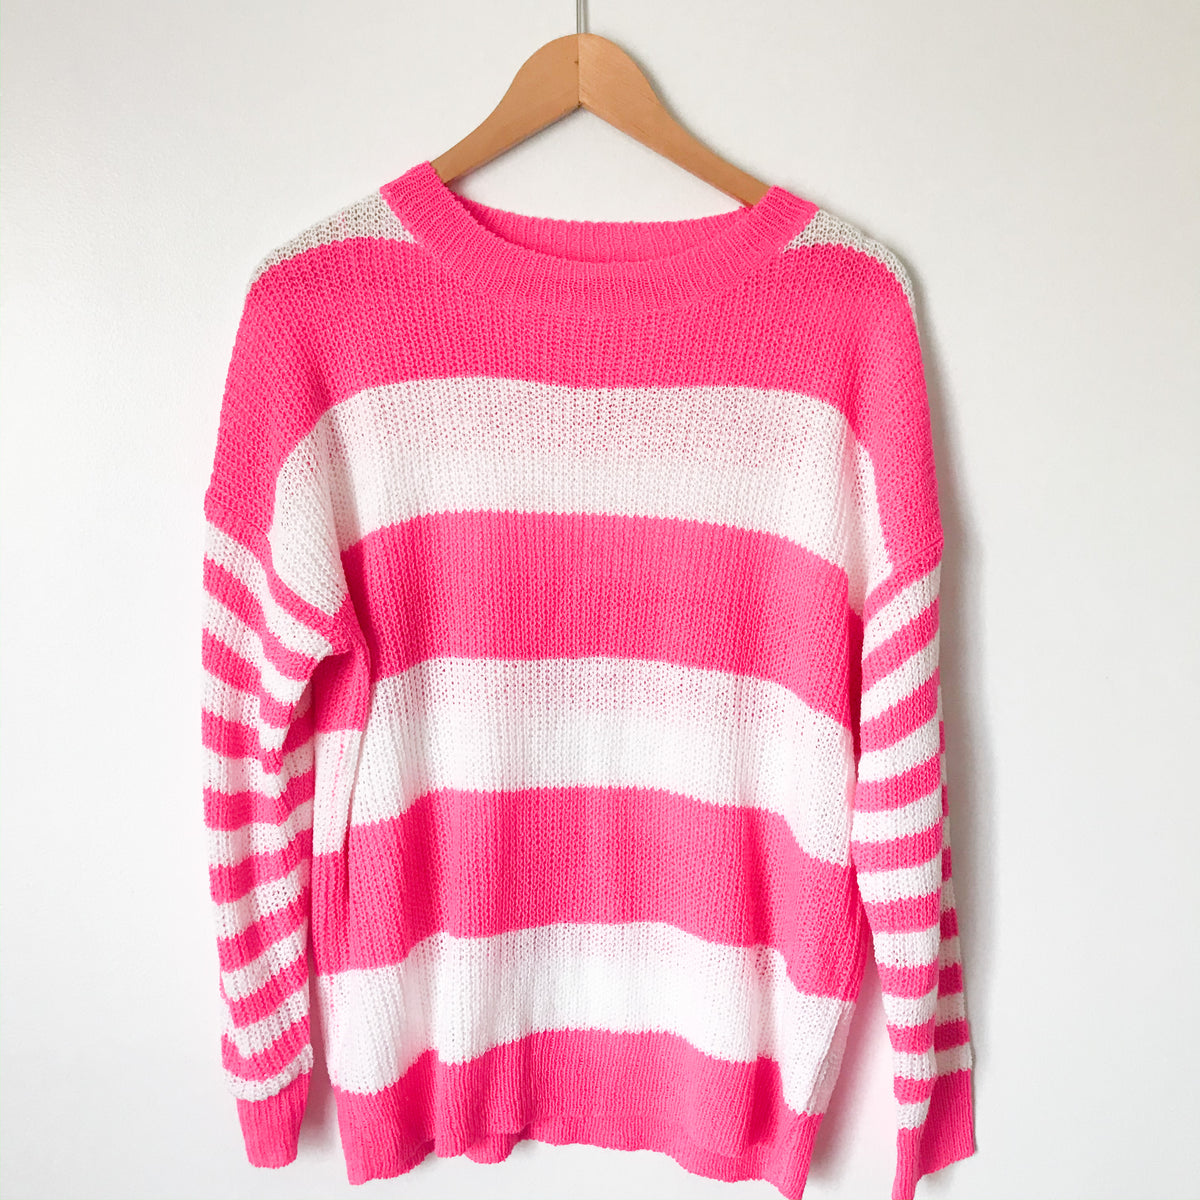 Dreamers Bright Pink and White Striped Sweater NWT - Size S/M – The Saved  Collection